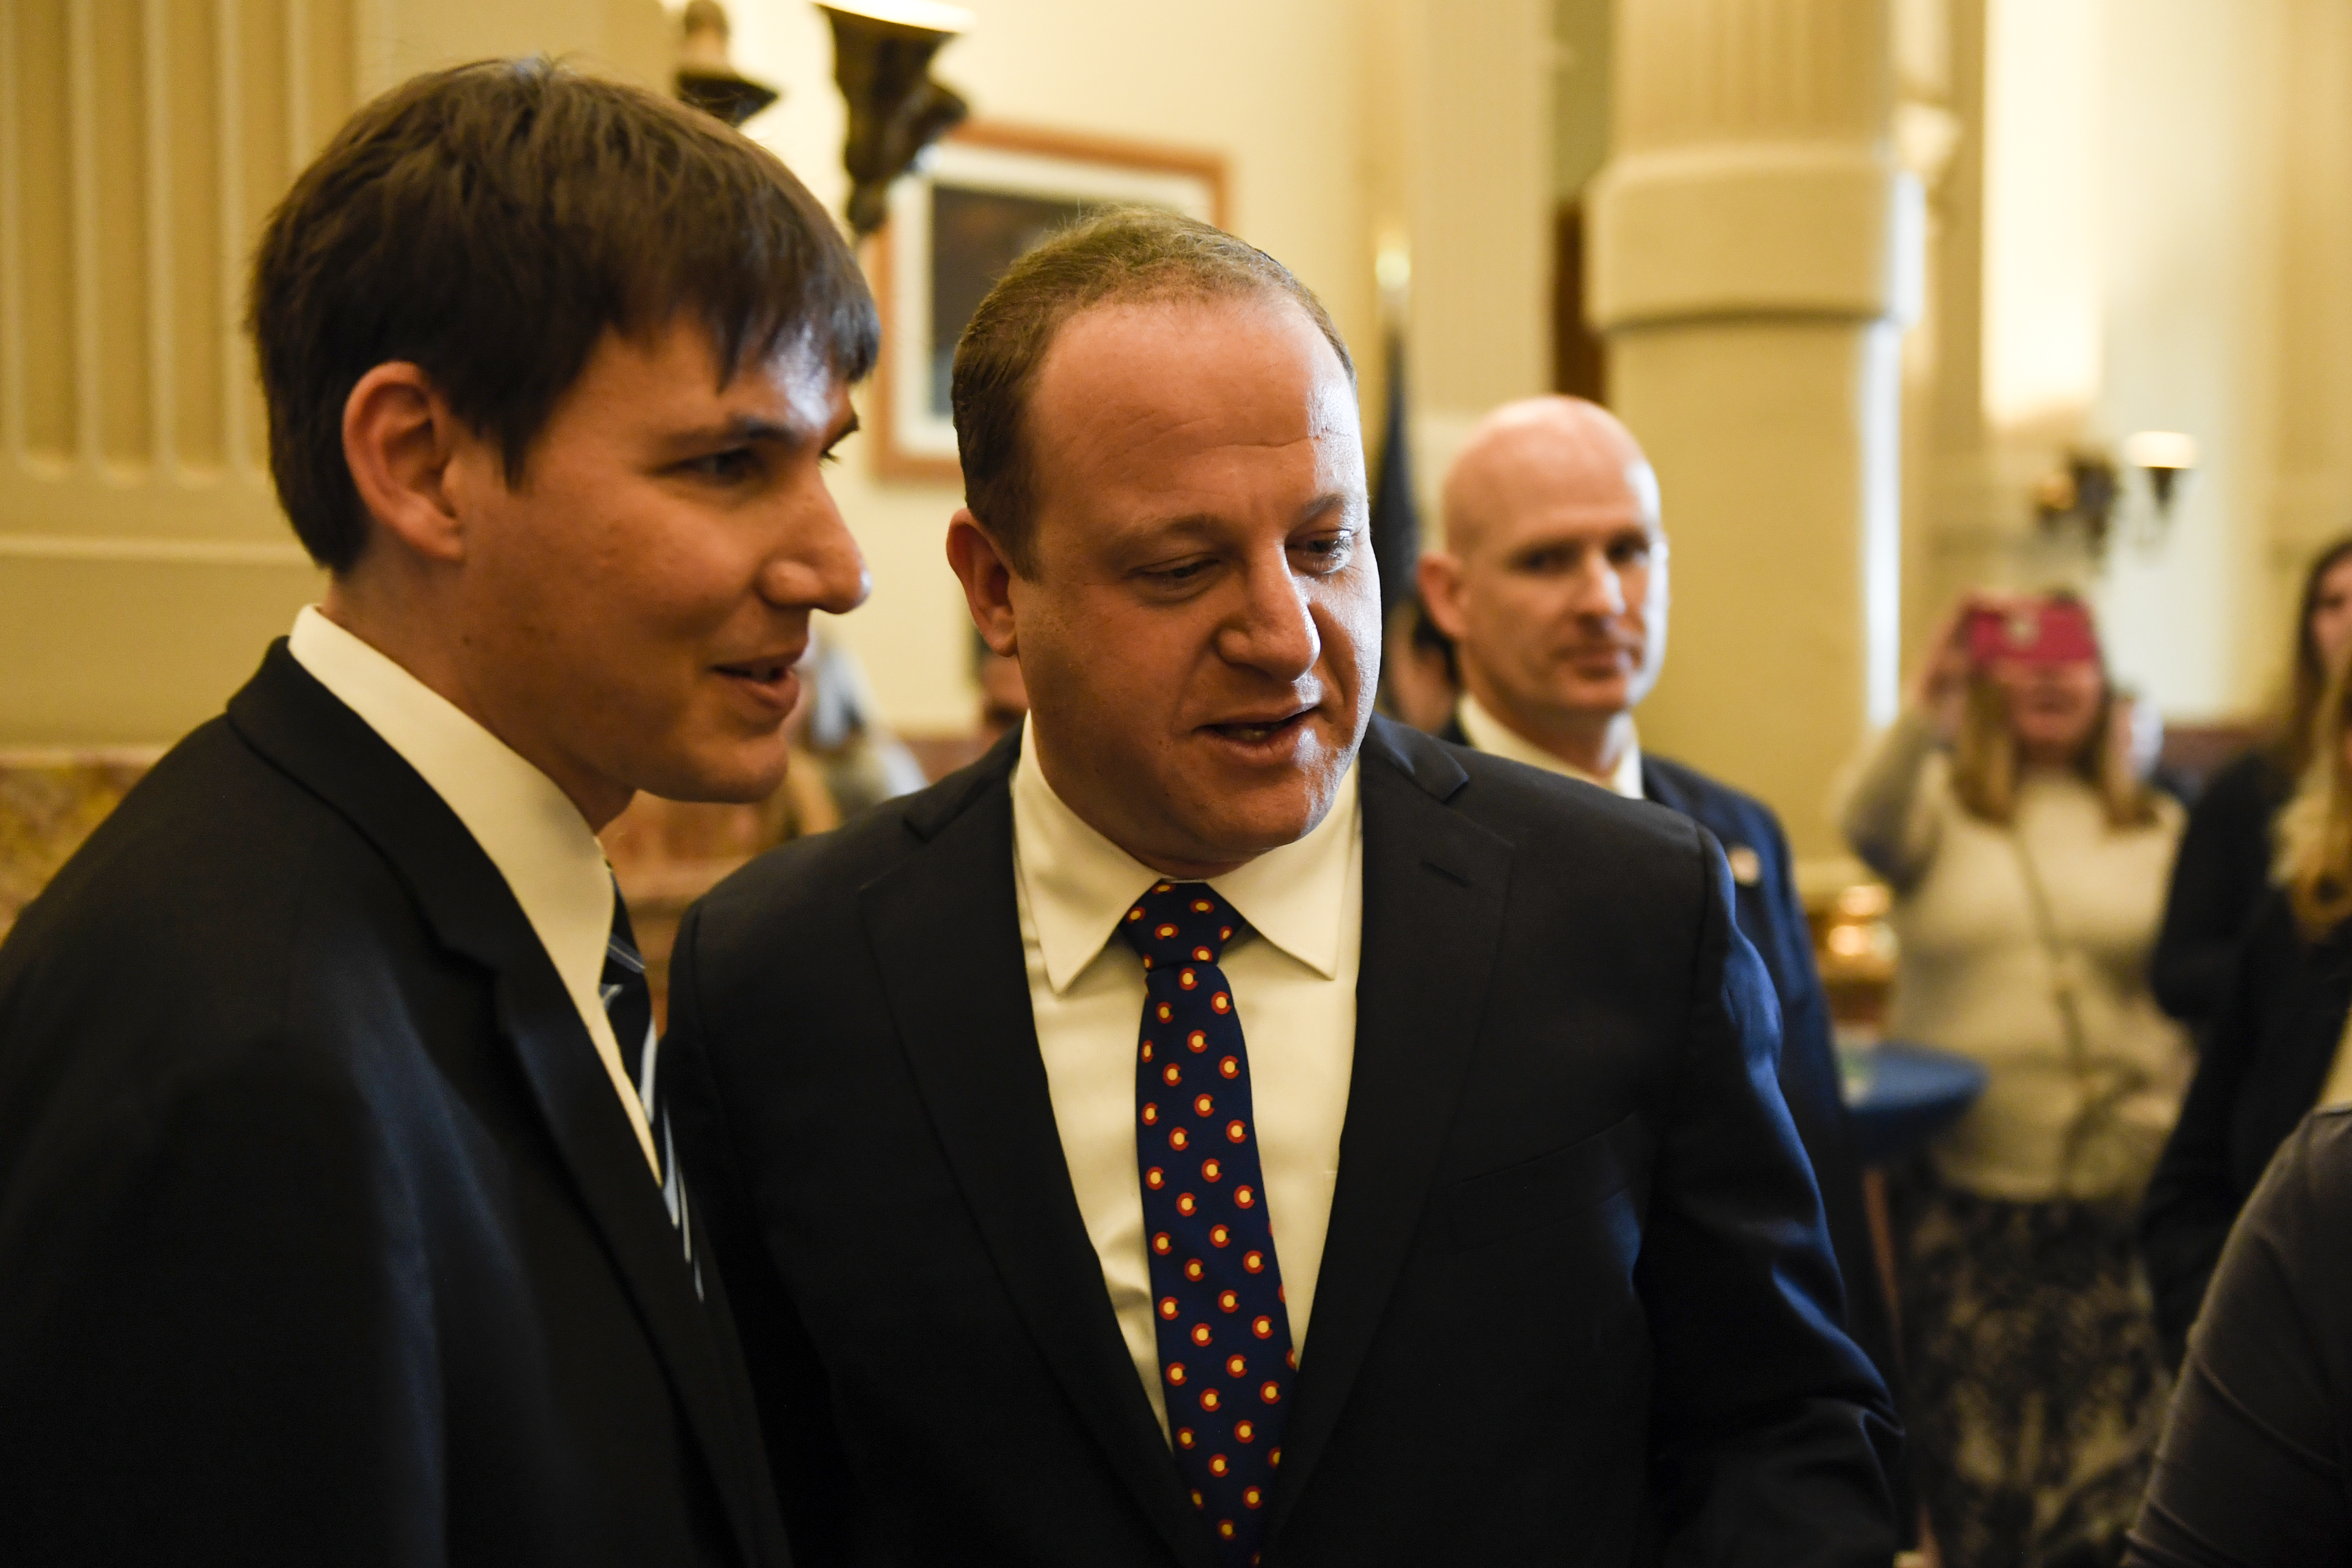 Gov. Jared Polis and his partner, Marlon Reis (right), look at student art on display after his inauguration at the Colorado State Capitol on Jan. 8, 2019.